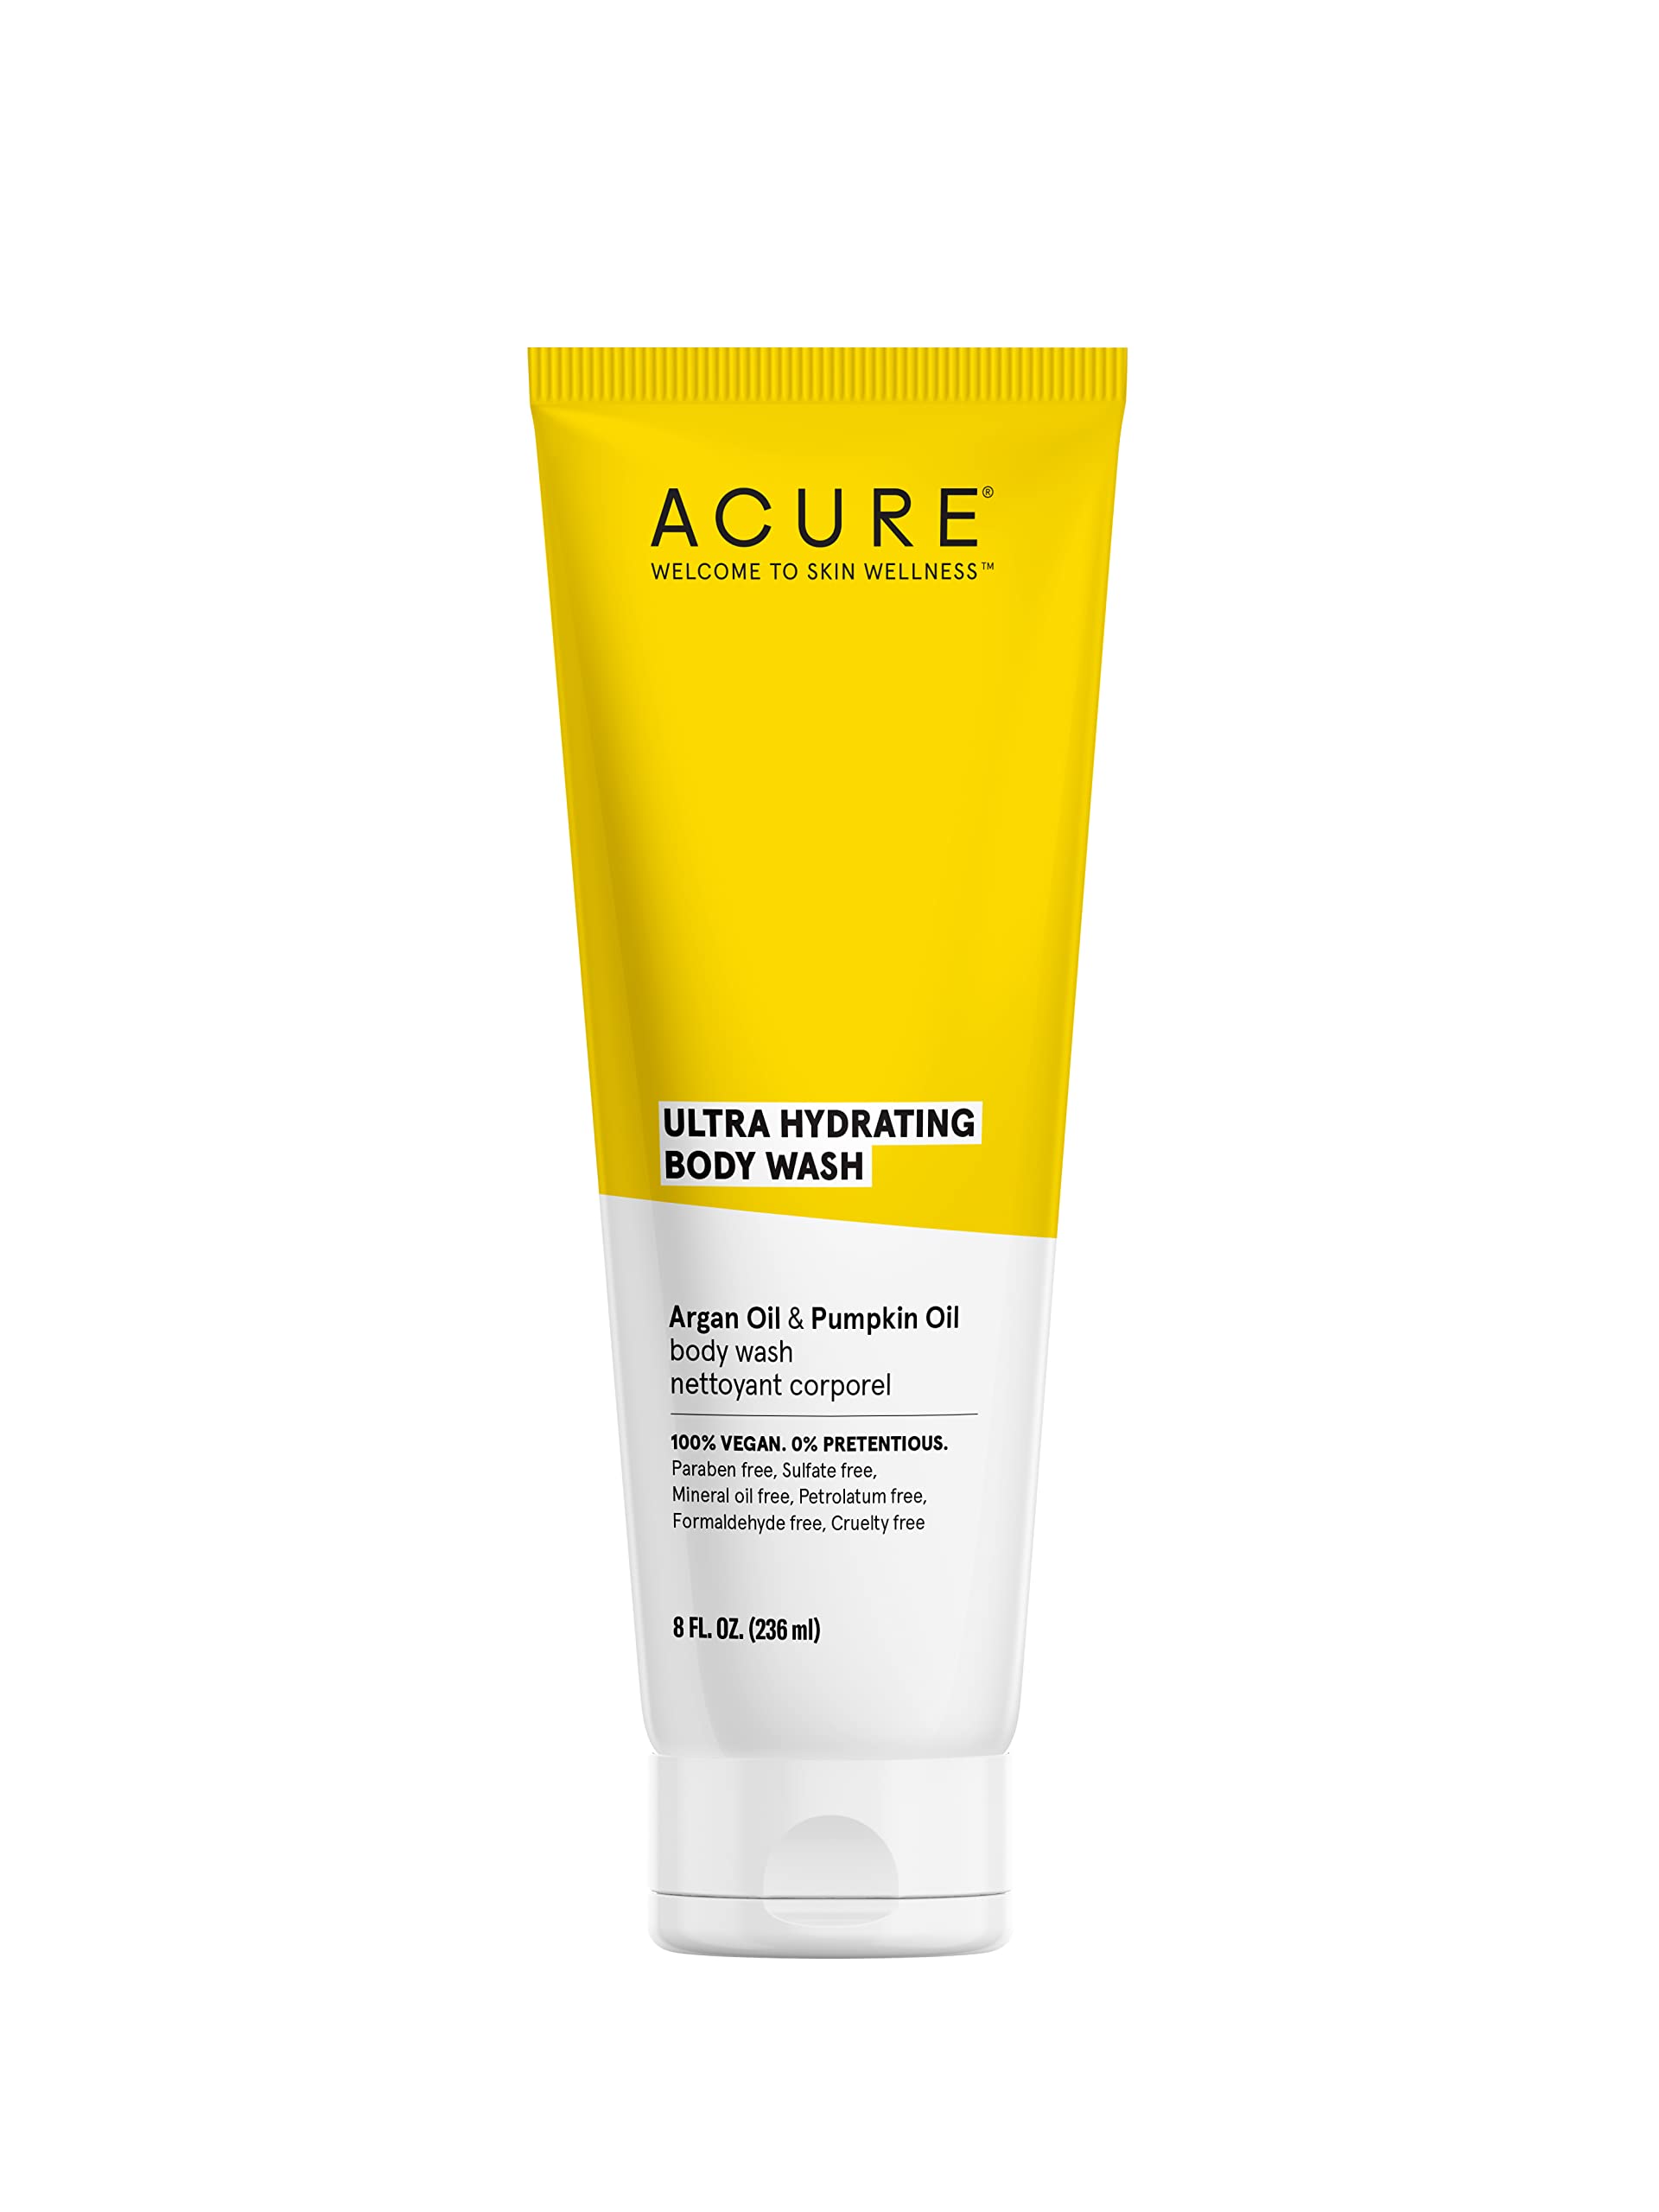 Acure body wash